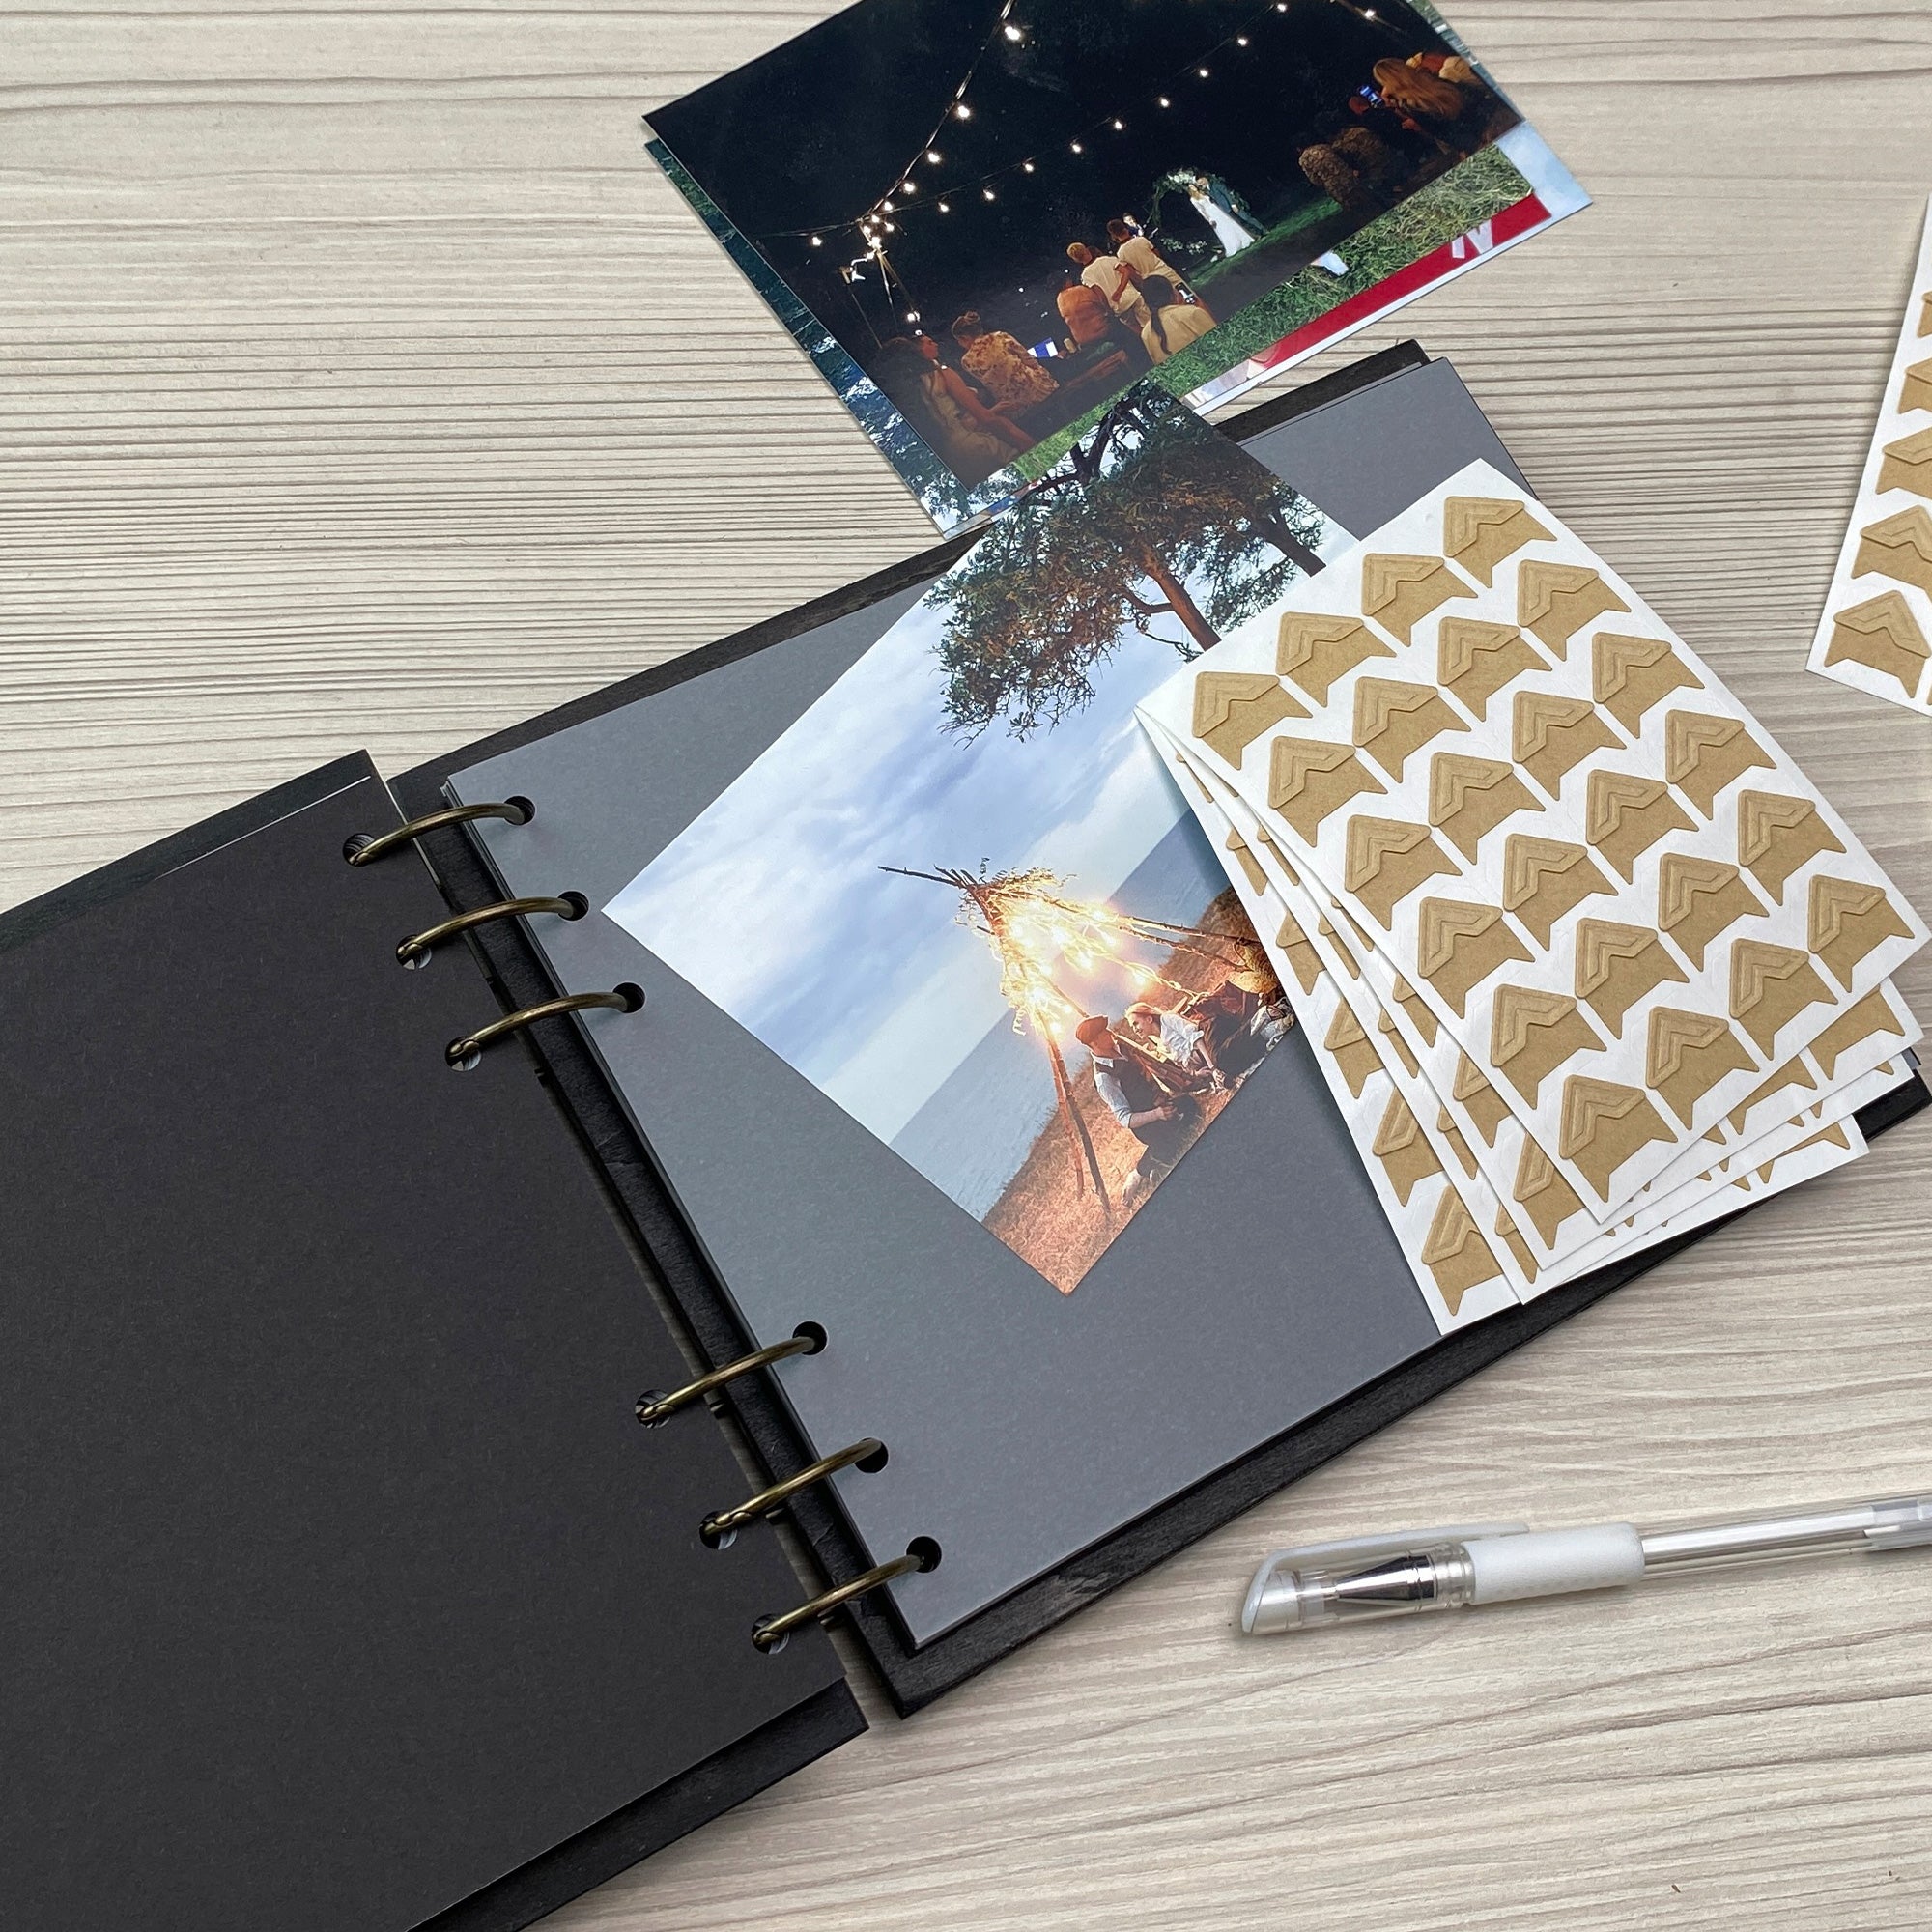 Personalized photo album cover and Flower engraving – skinwoodukraine